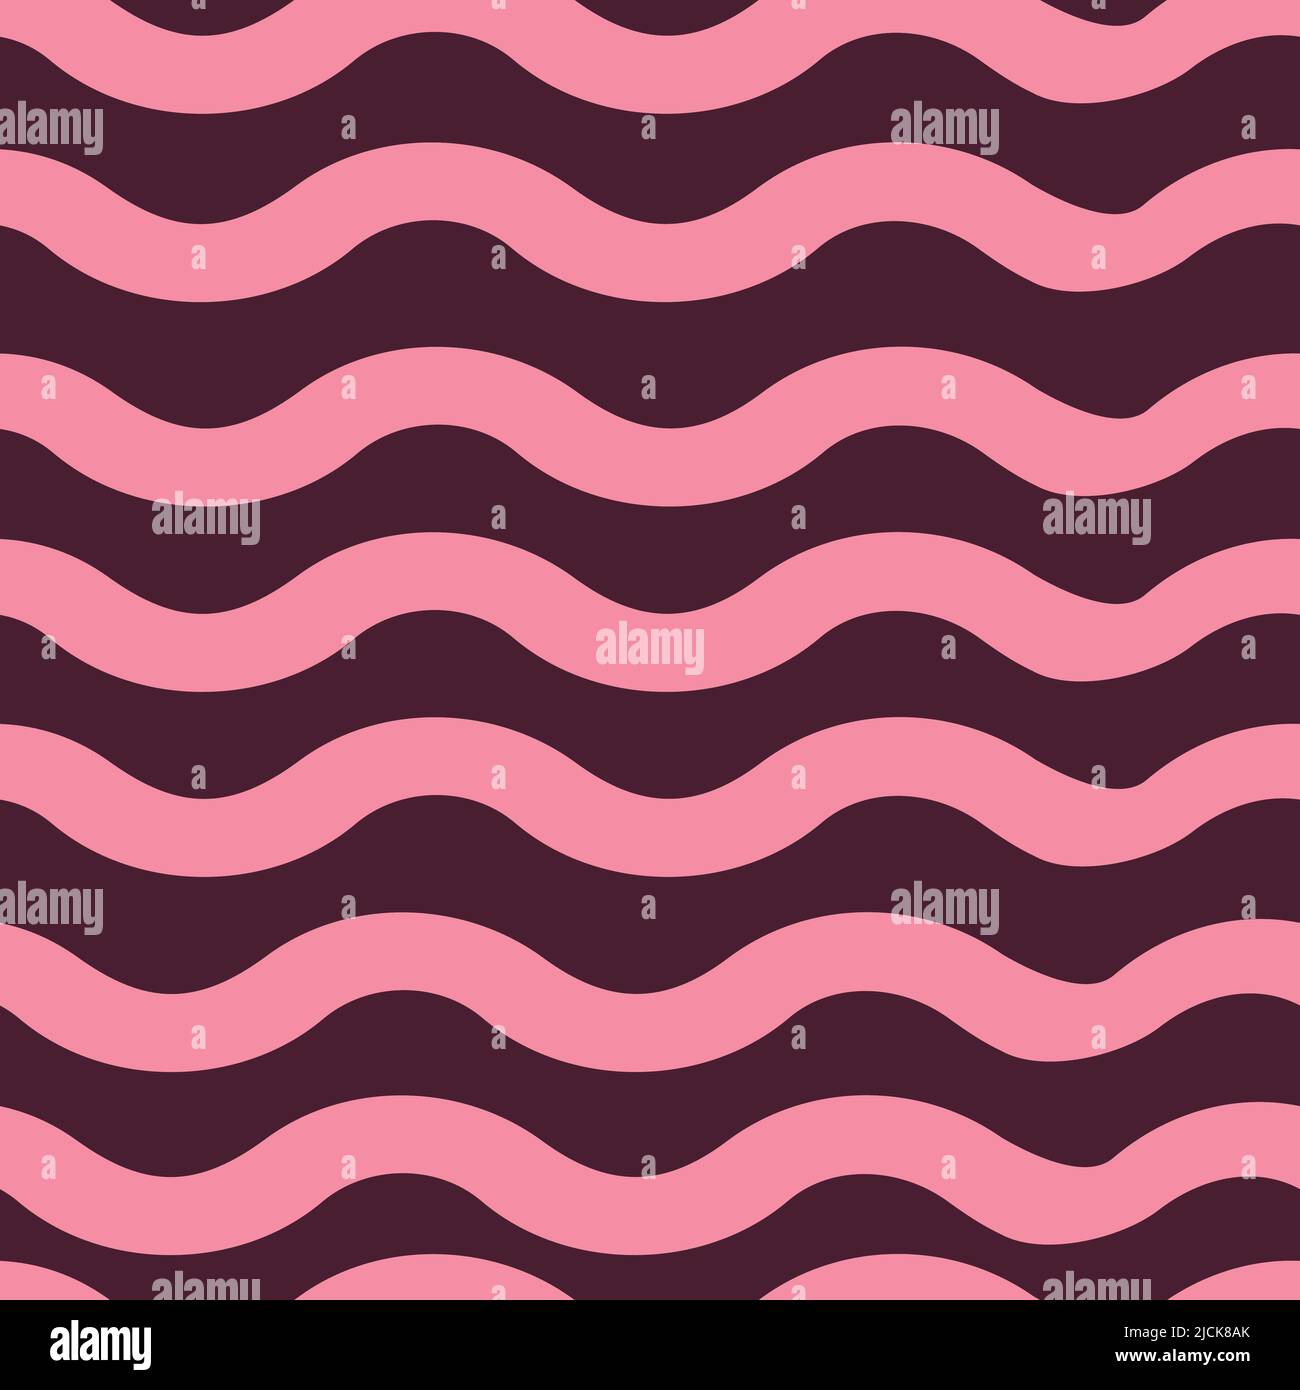 Seamless vector pattern with pink and purple lines. Simple wavy brush stroke background. Girly decorative wallpaper design. Striped fashion textile. Stock Vector